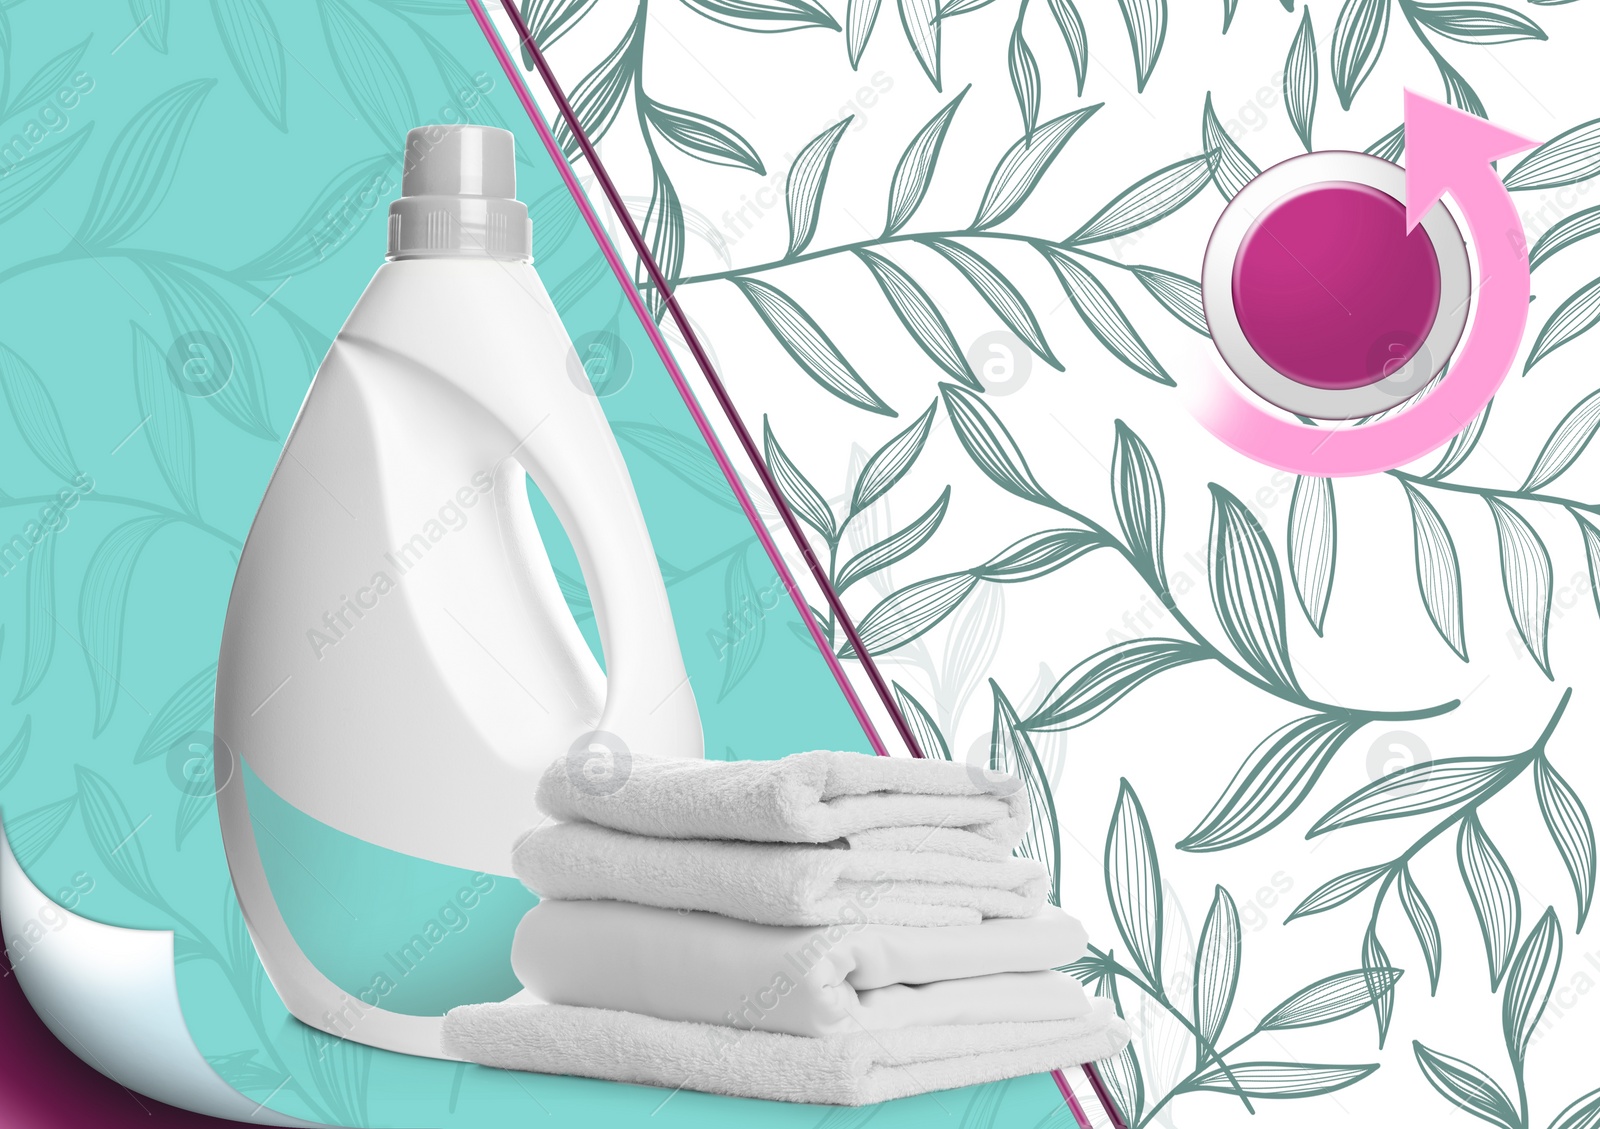 Image of Fabric softener advertising design. Bottle of conditioner and soft clean towels on color background with foliage pattern. Illustration of washing machine button